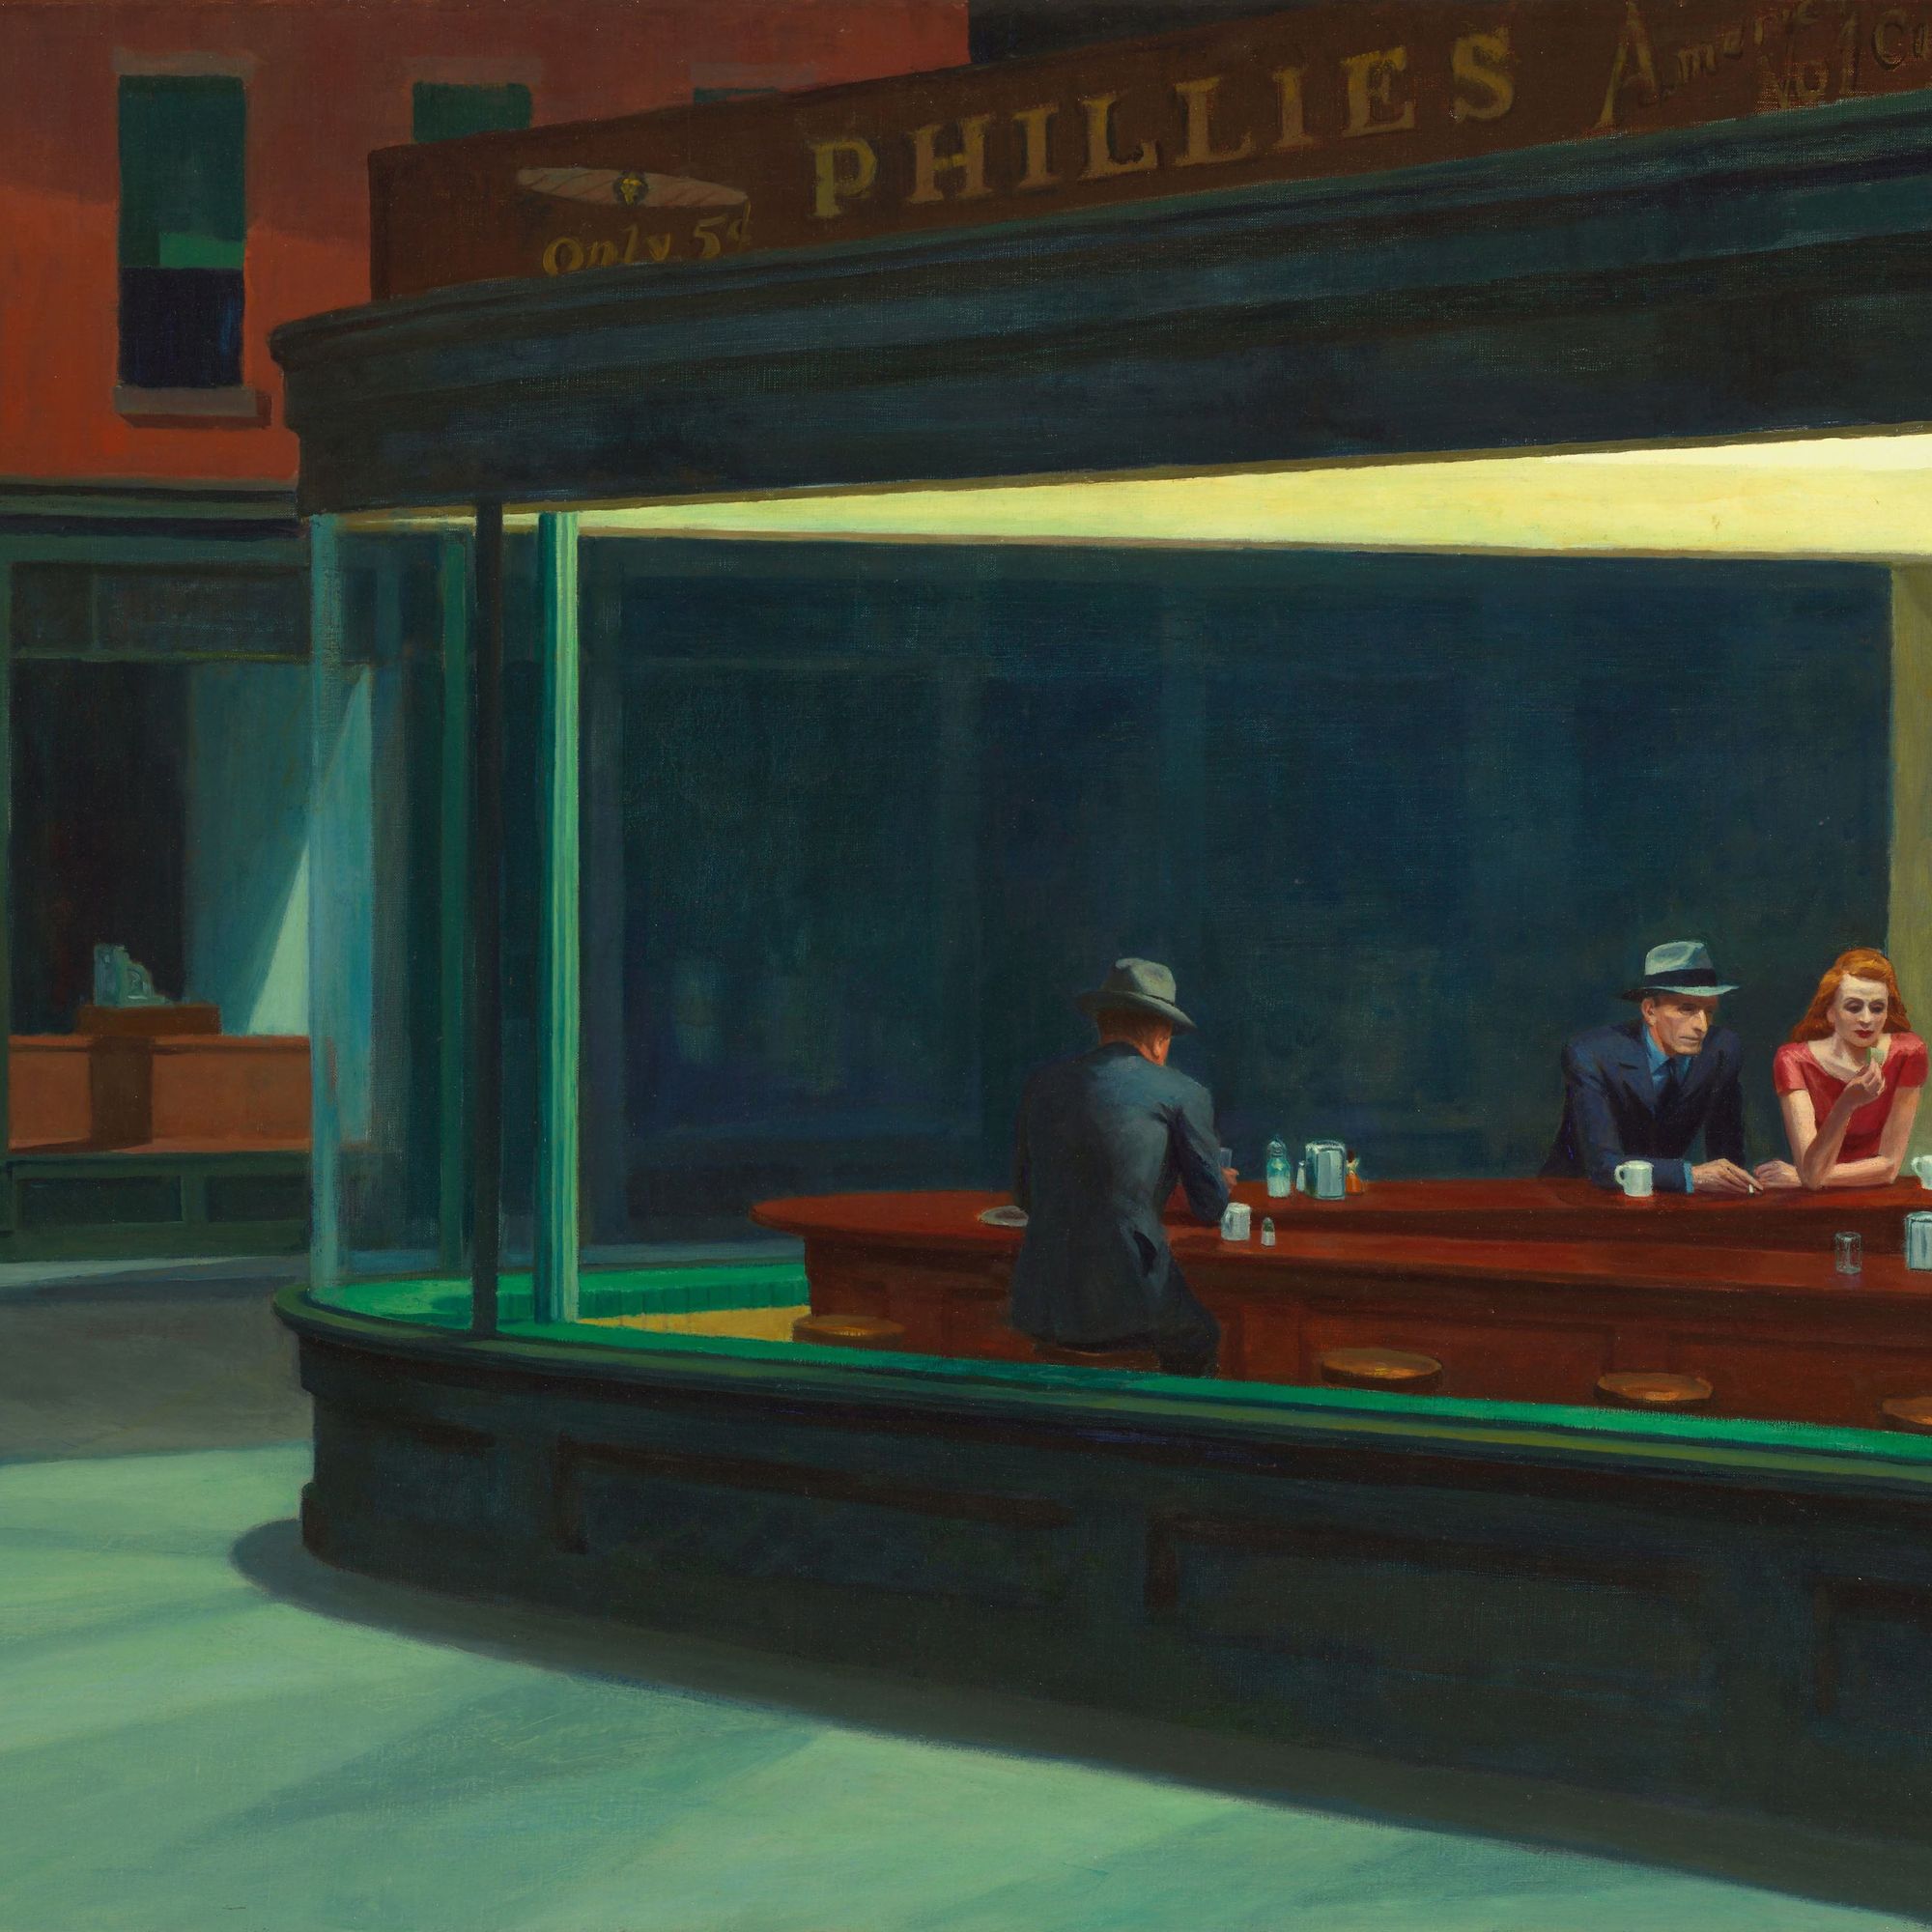 Edward Hopper painting of a man in a diner late at night.